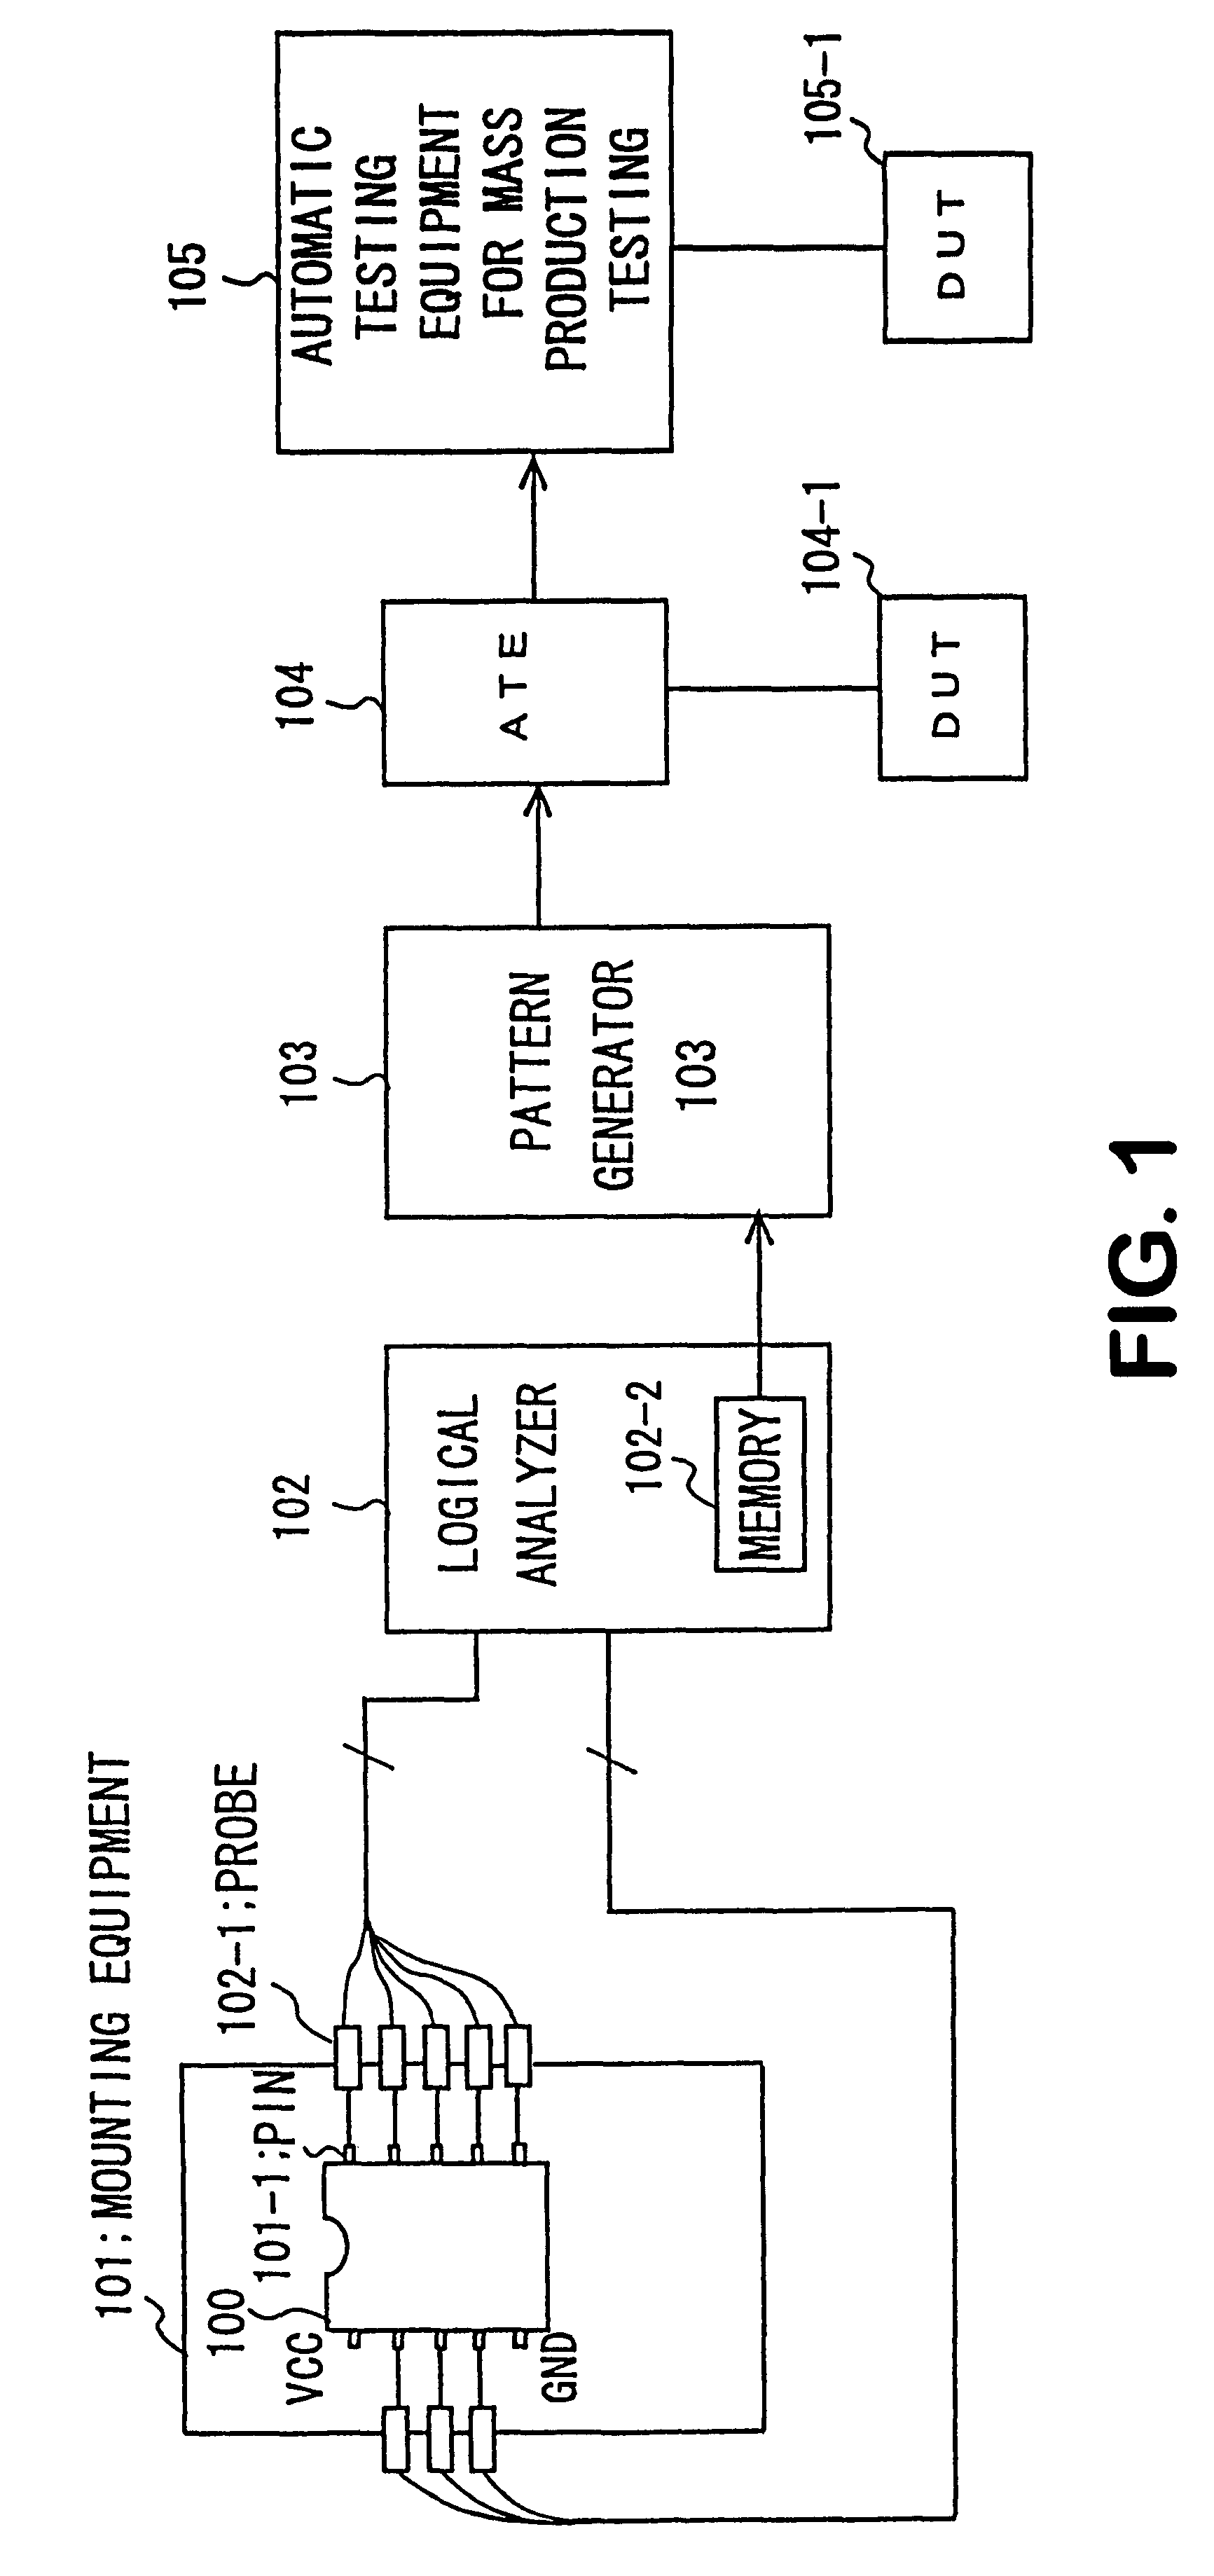 Semiconductor device testing method and system employing trace data